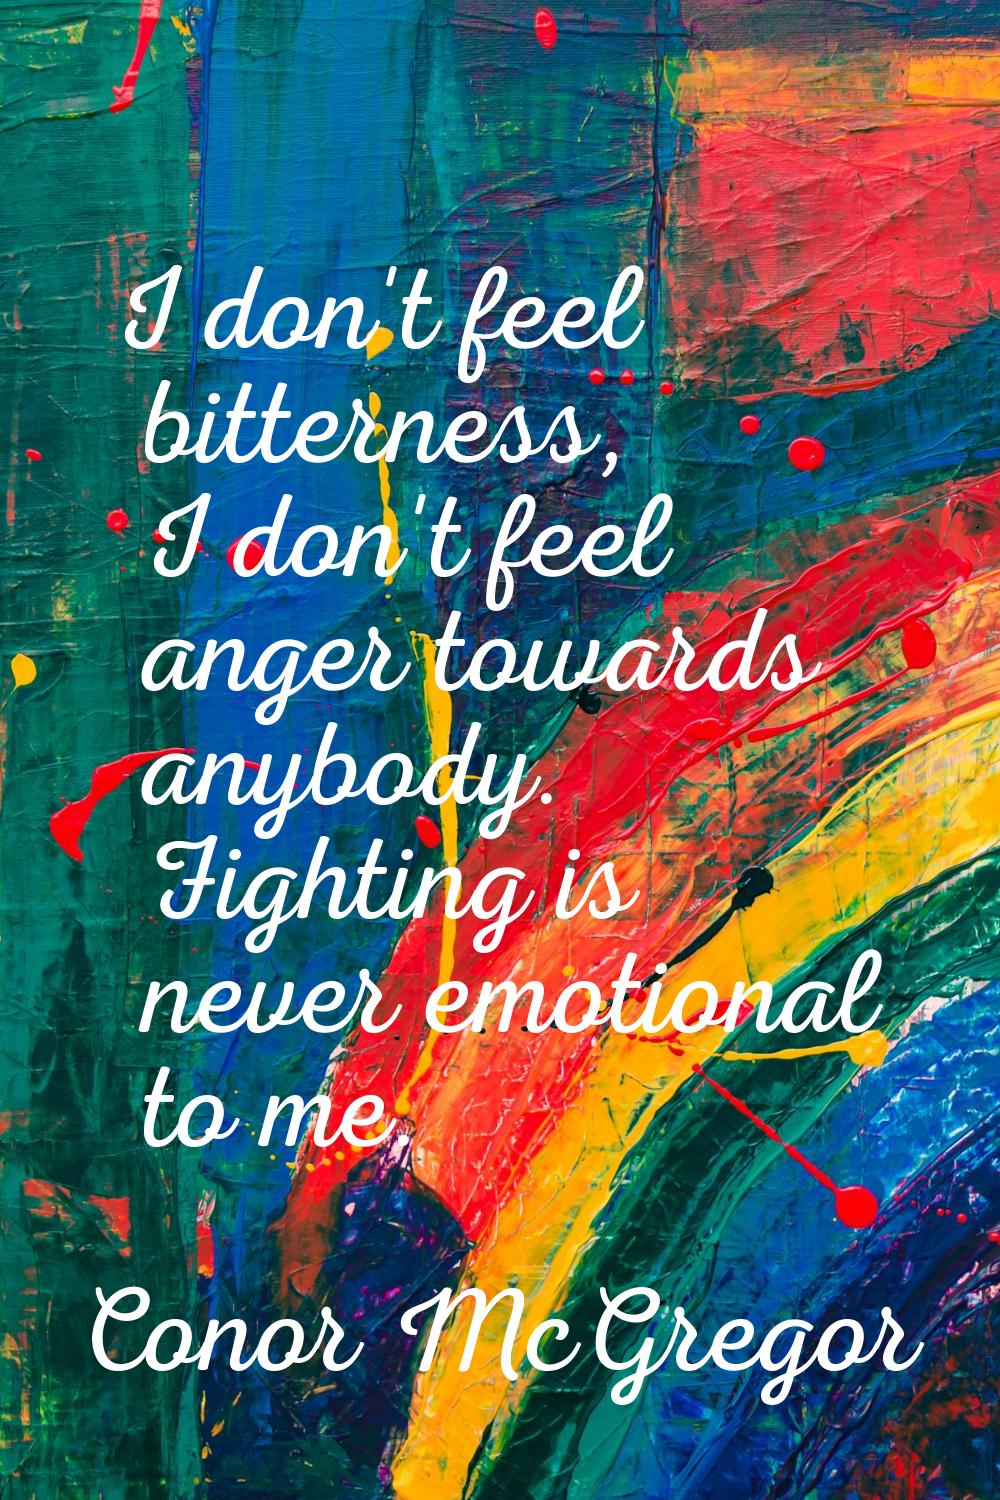 I don't feel bitterness, I don't feel anger towards anybody. Fighting is never emotional to me.